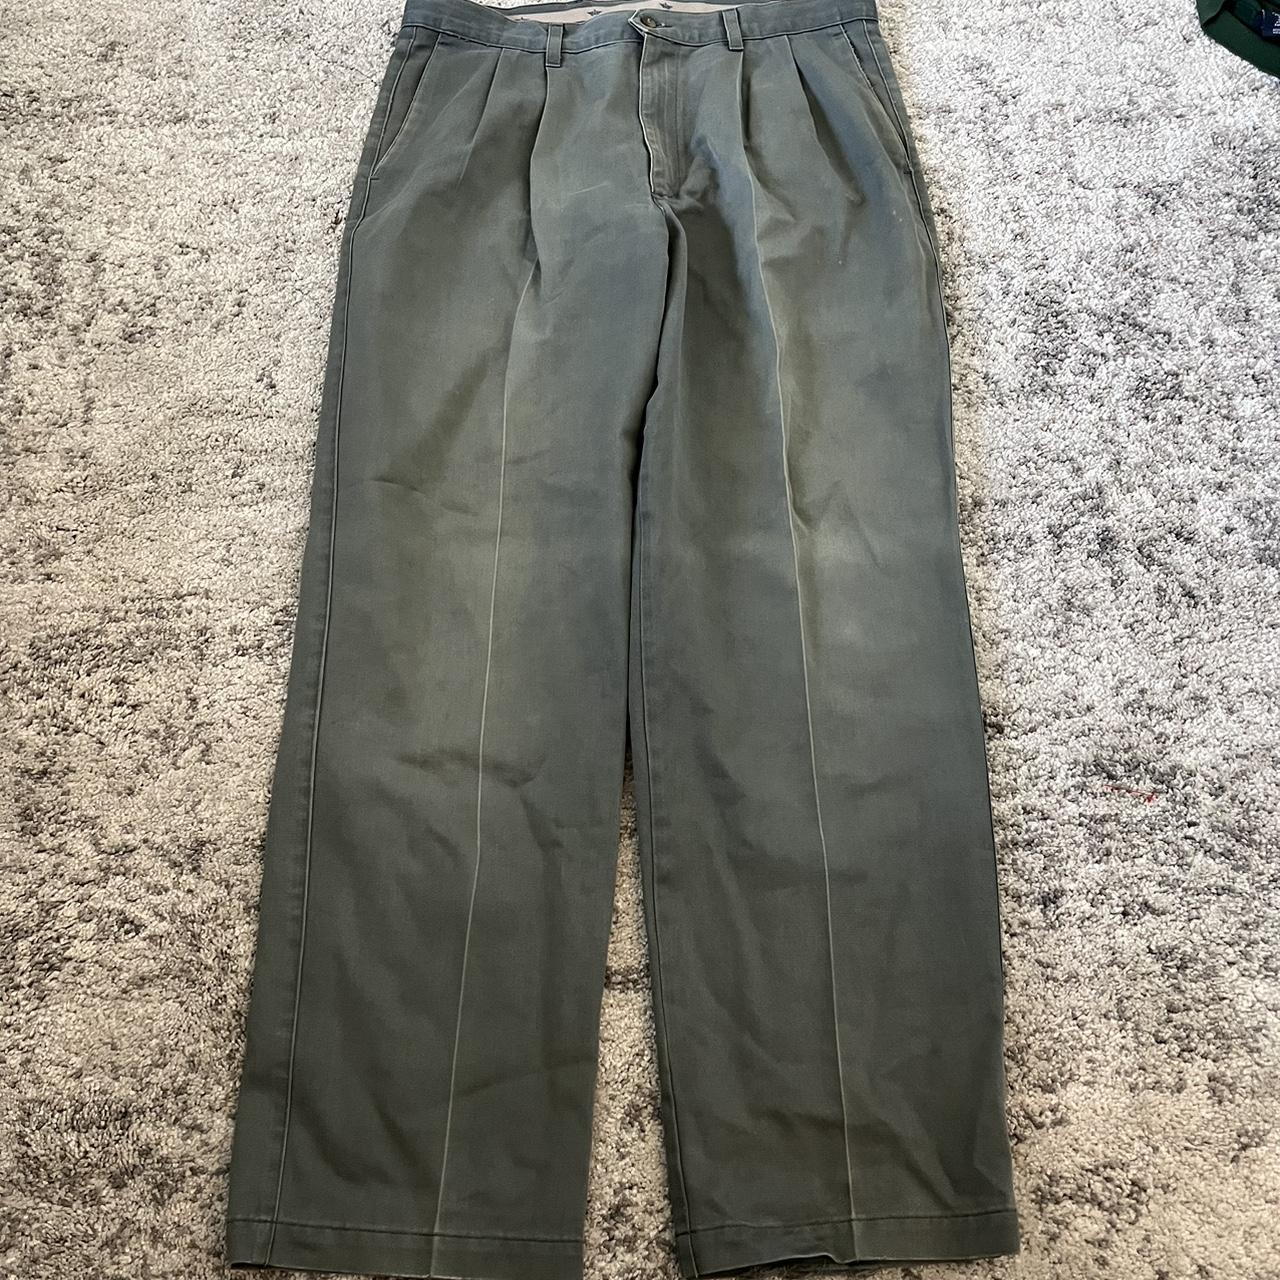 item listed by wantedcloset